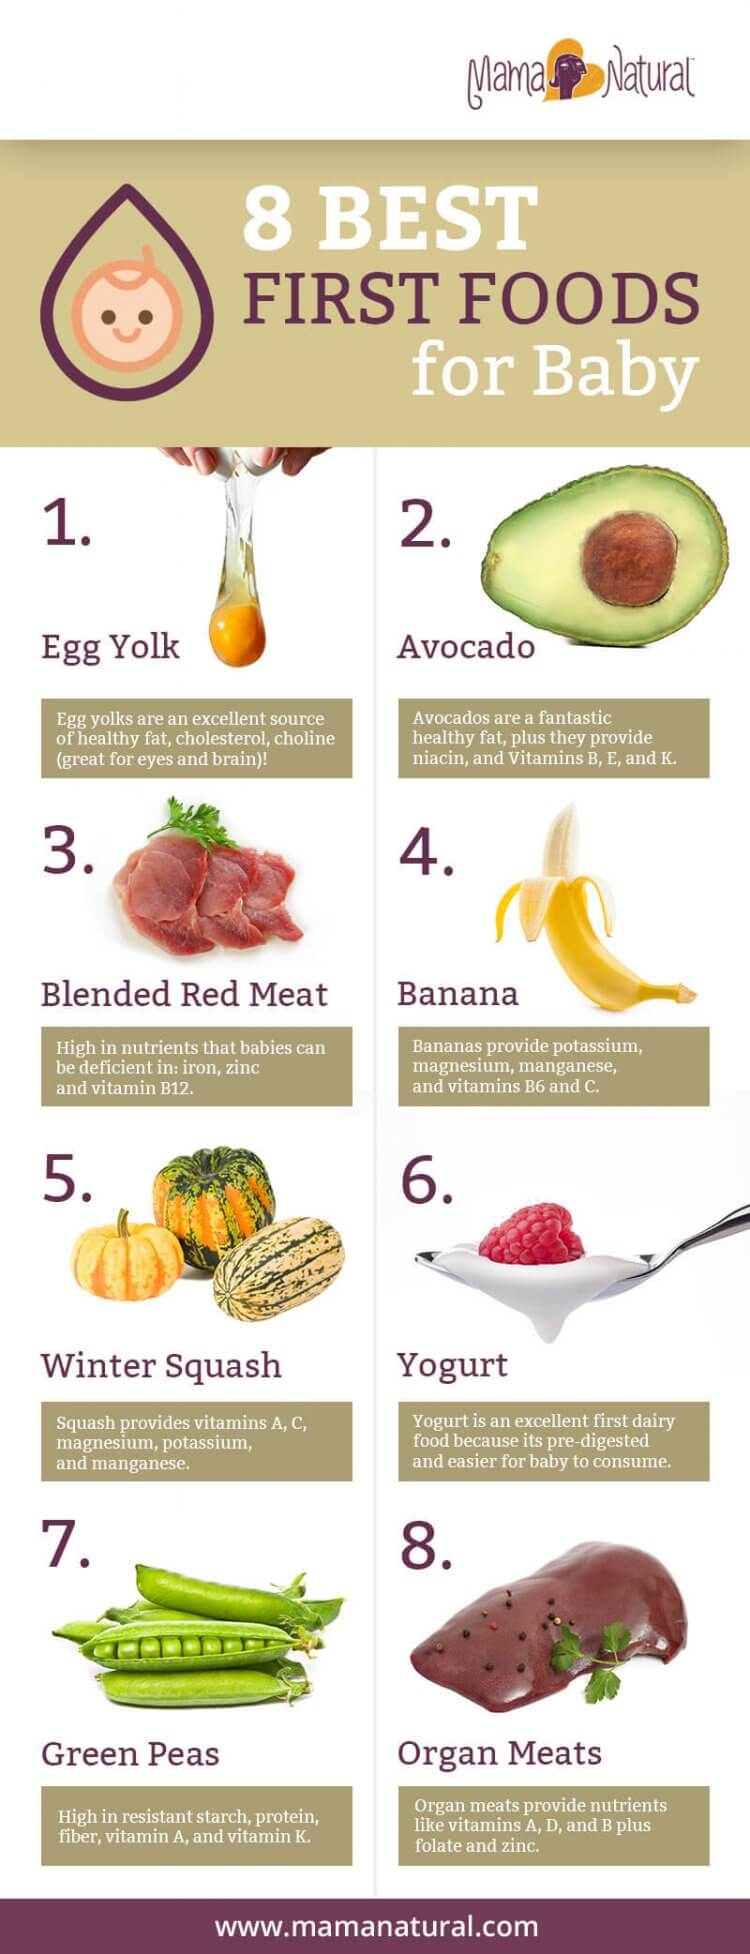 https://www.mamanatural.com/wp-content/uploads/The-Surprising-Best-First-Foods-for-Baby-baby-post-by-Mama-Natural-Pinterest-750x1954.jpg